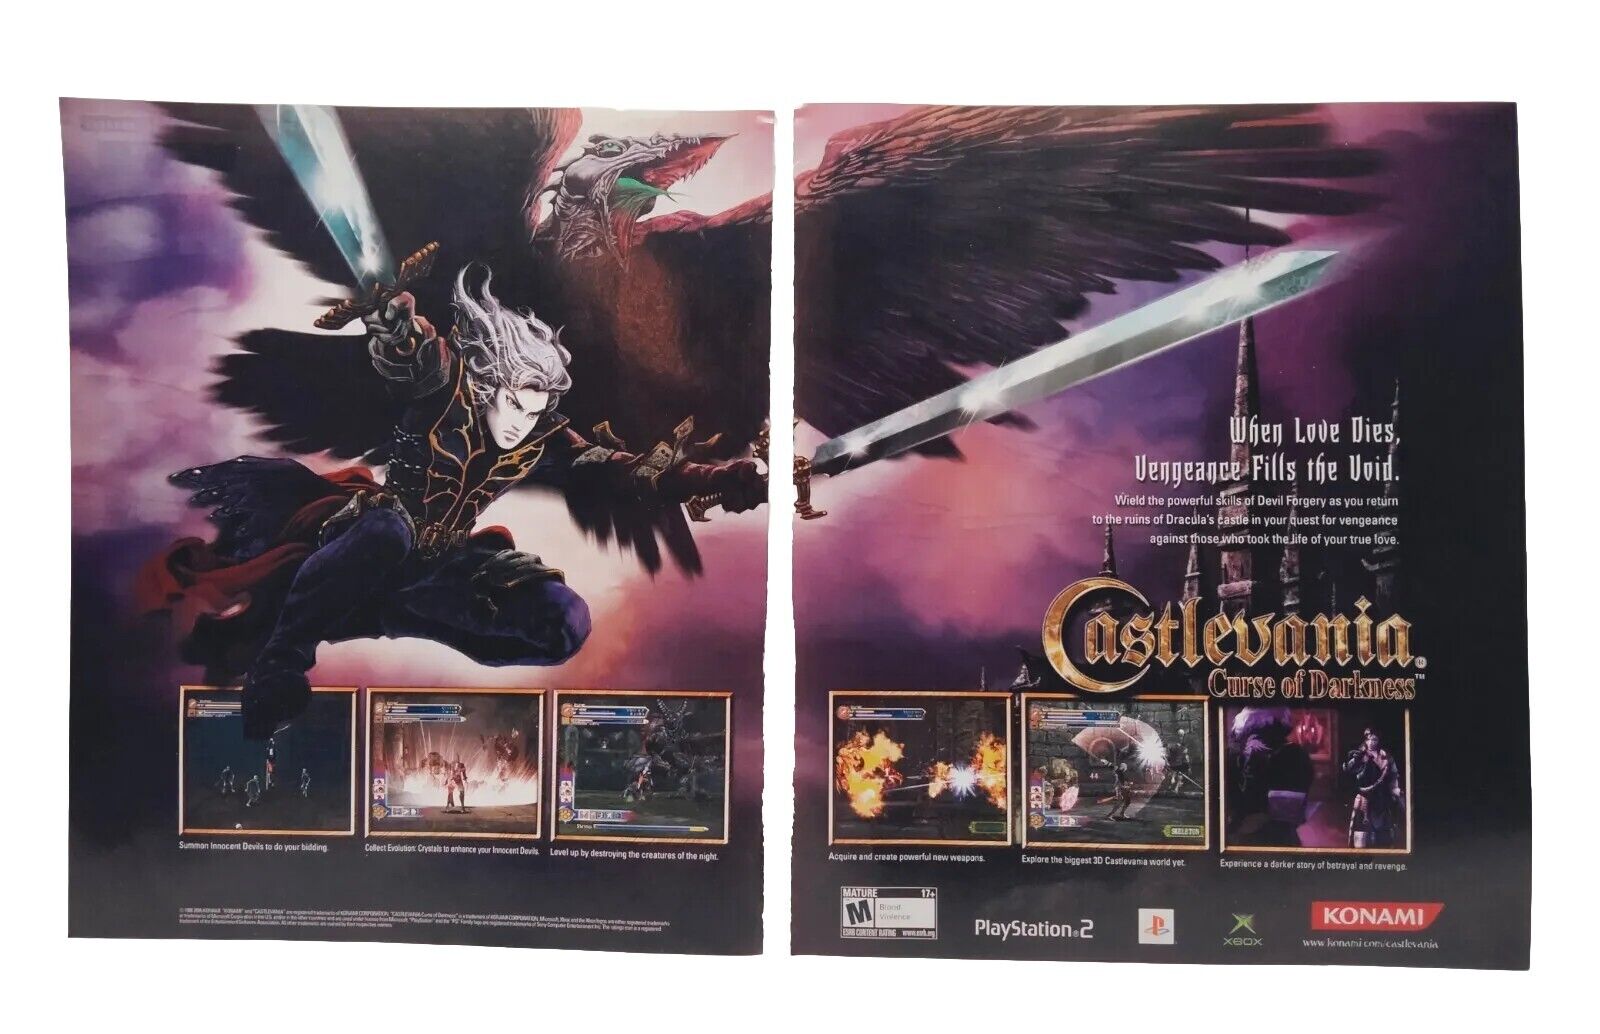 Castlevania Curse of Darkness Print Ad Poster Official Art Vintage 2005 PS2 Xbox